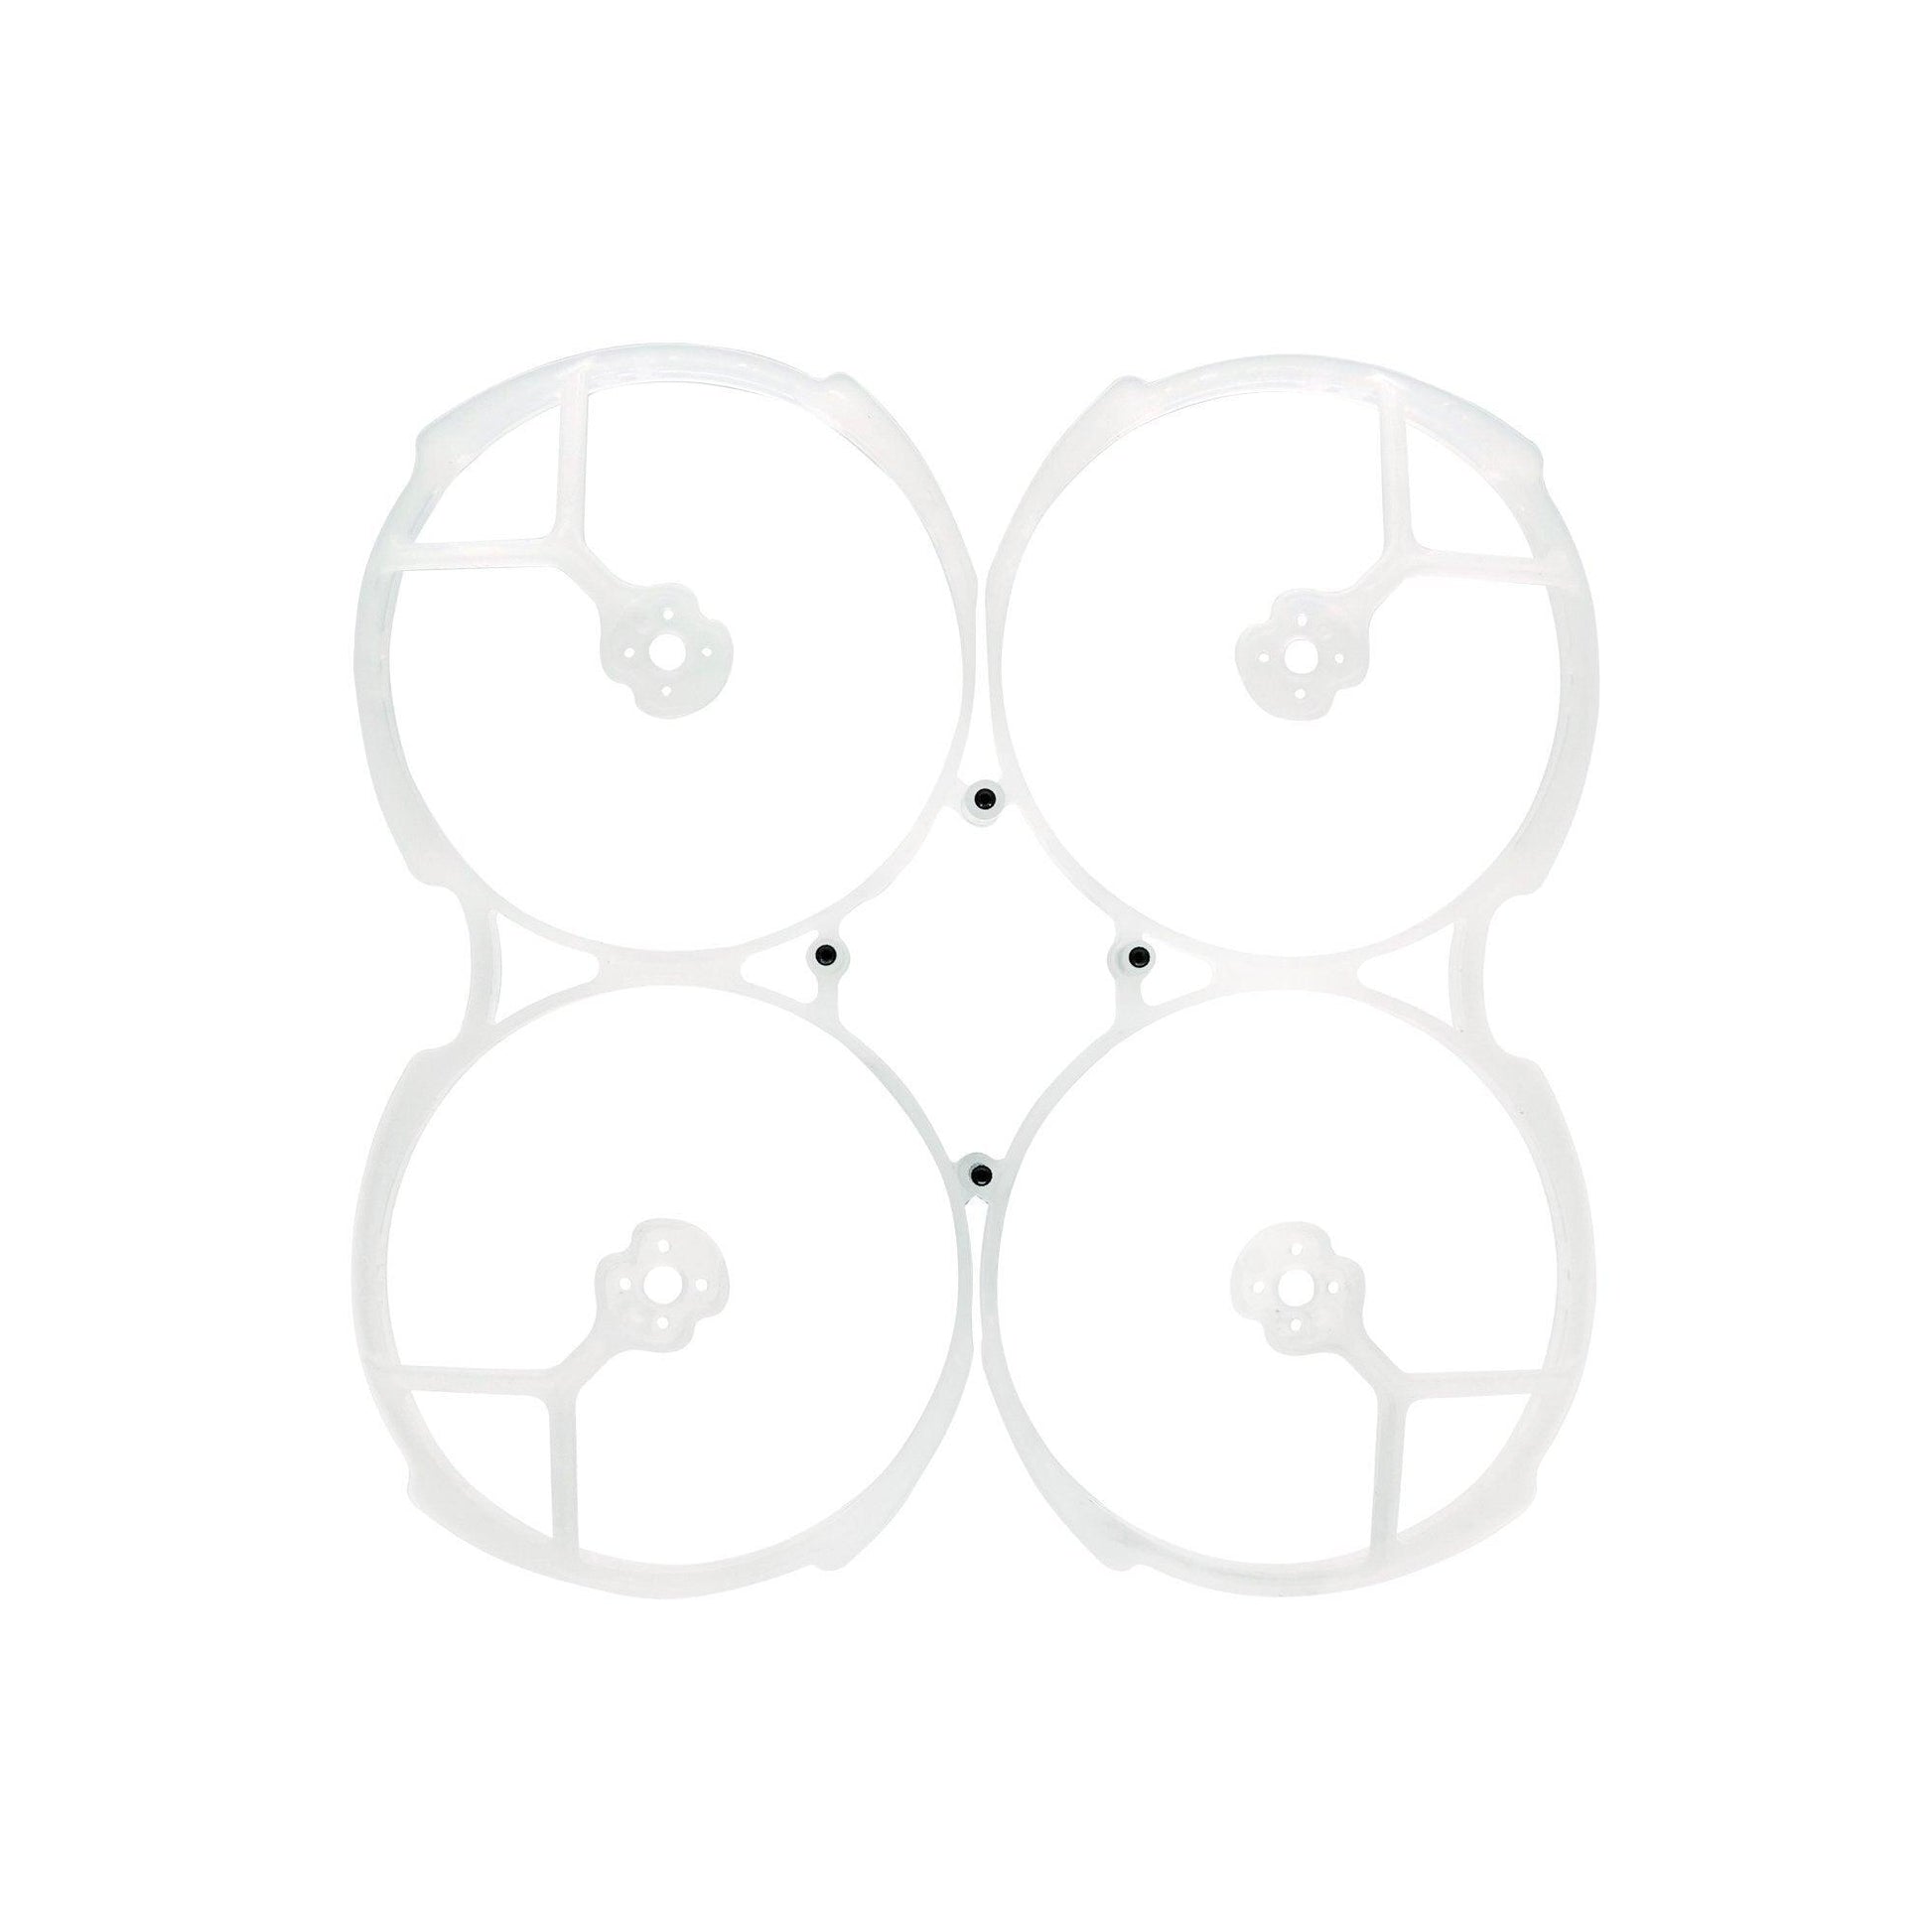 GEPRC GEP-CL35 Propeller Guard - Frame Parts Suitable For Cinelog35 Series Drone For DIY RC FPV Quadcopter Replacement Accessories - RCDrone